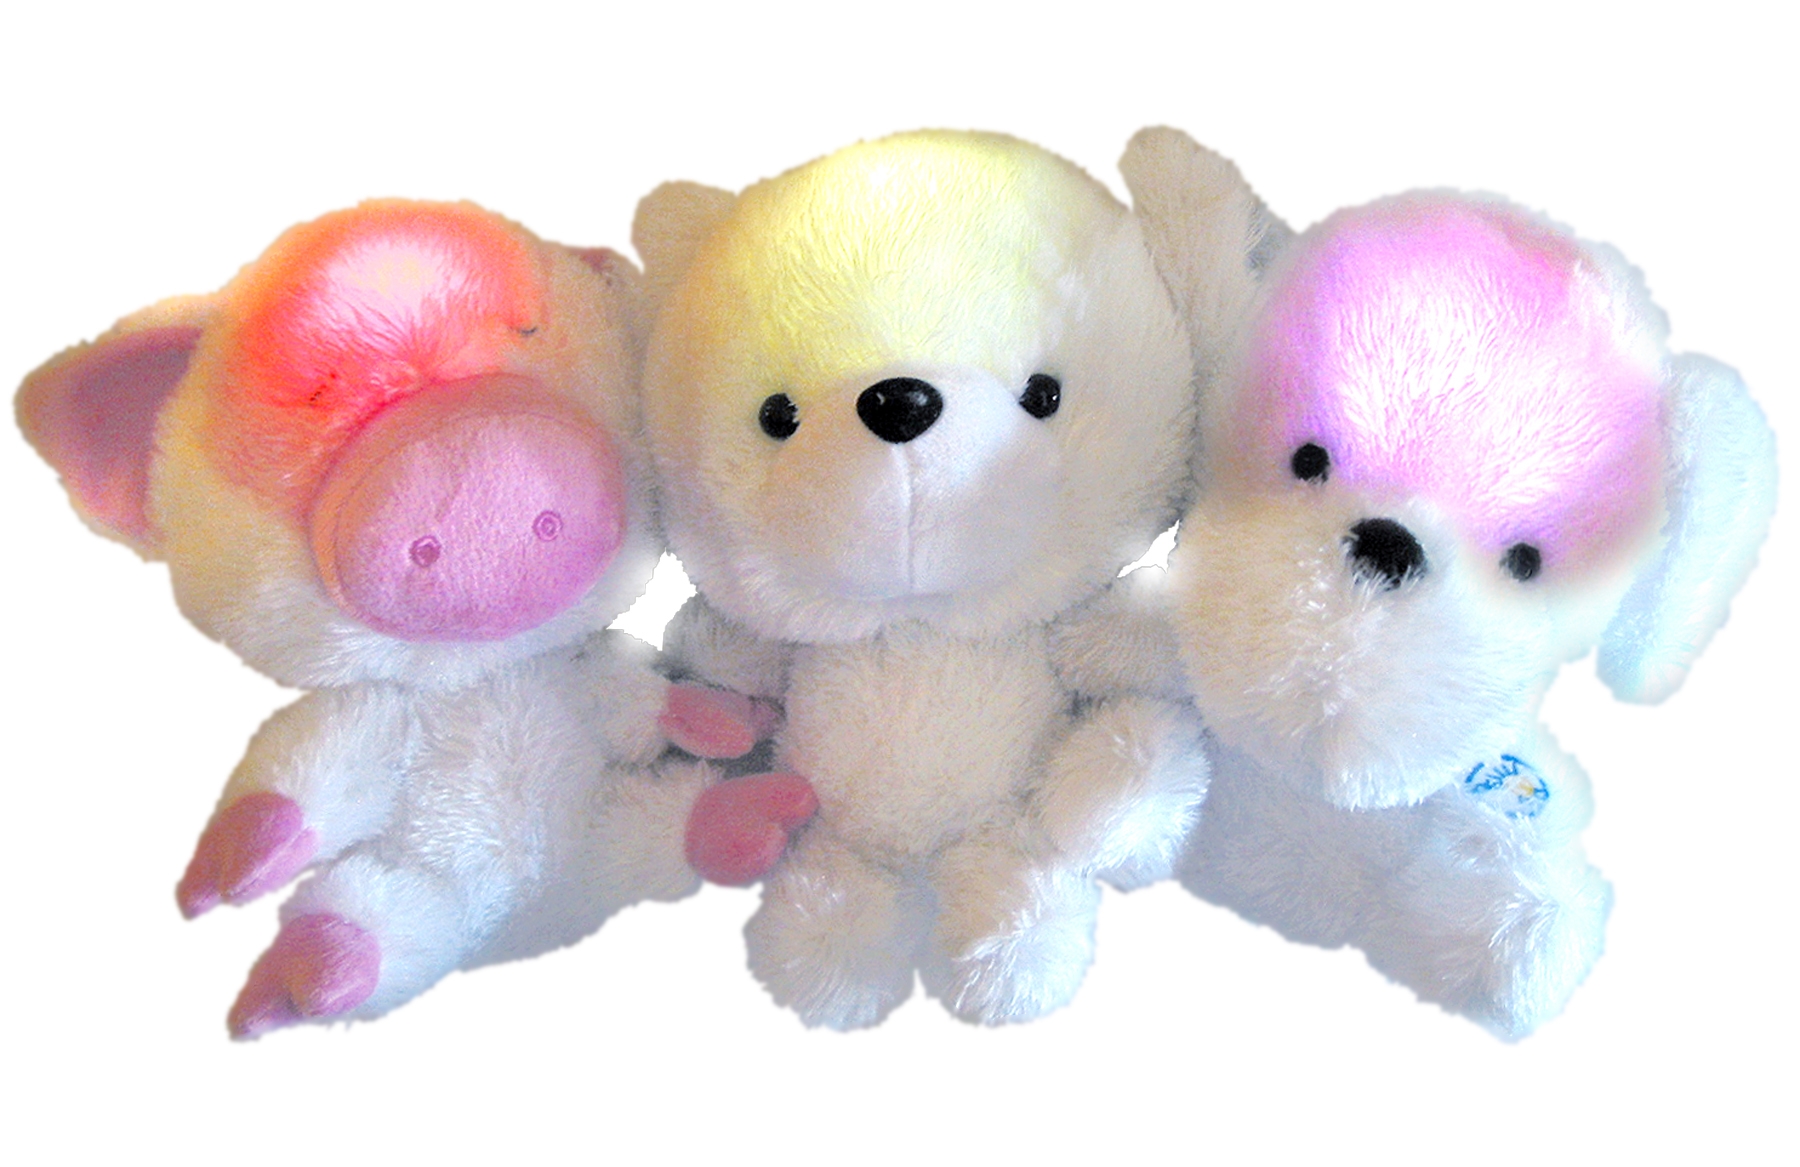 Your huggly, snuggly light up friend with giant Sleepy Heads! Choose from Bear, Dog or Pig and light